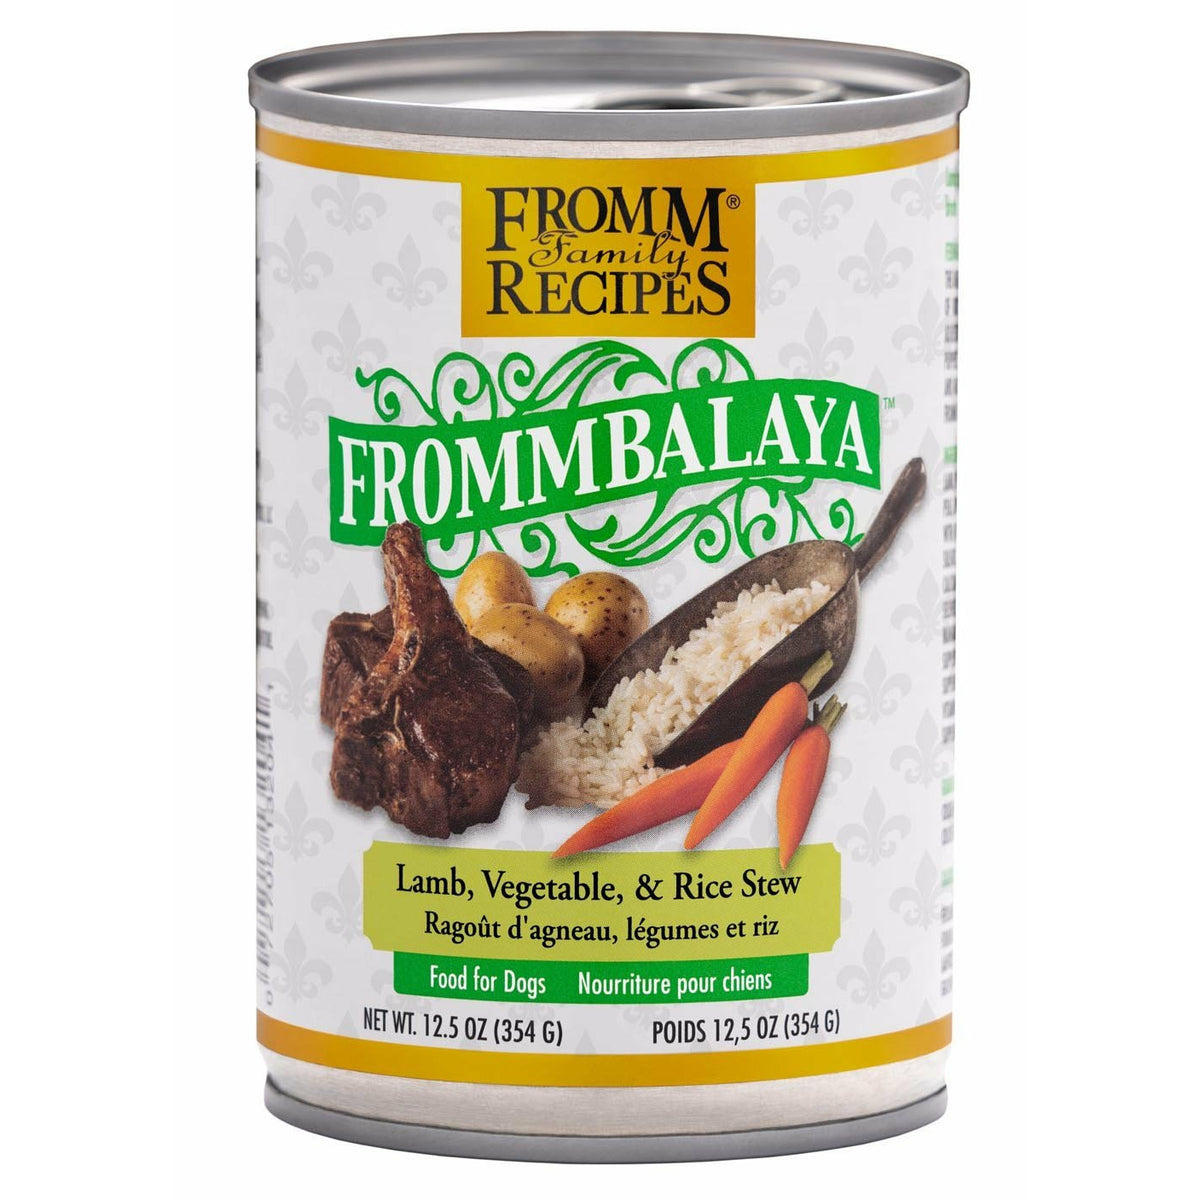 Fromm Family Recipes - Frommbalaya Lamb, Vegetable, &amp; Rice Stew - Canned Dog Food (354g)